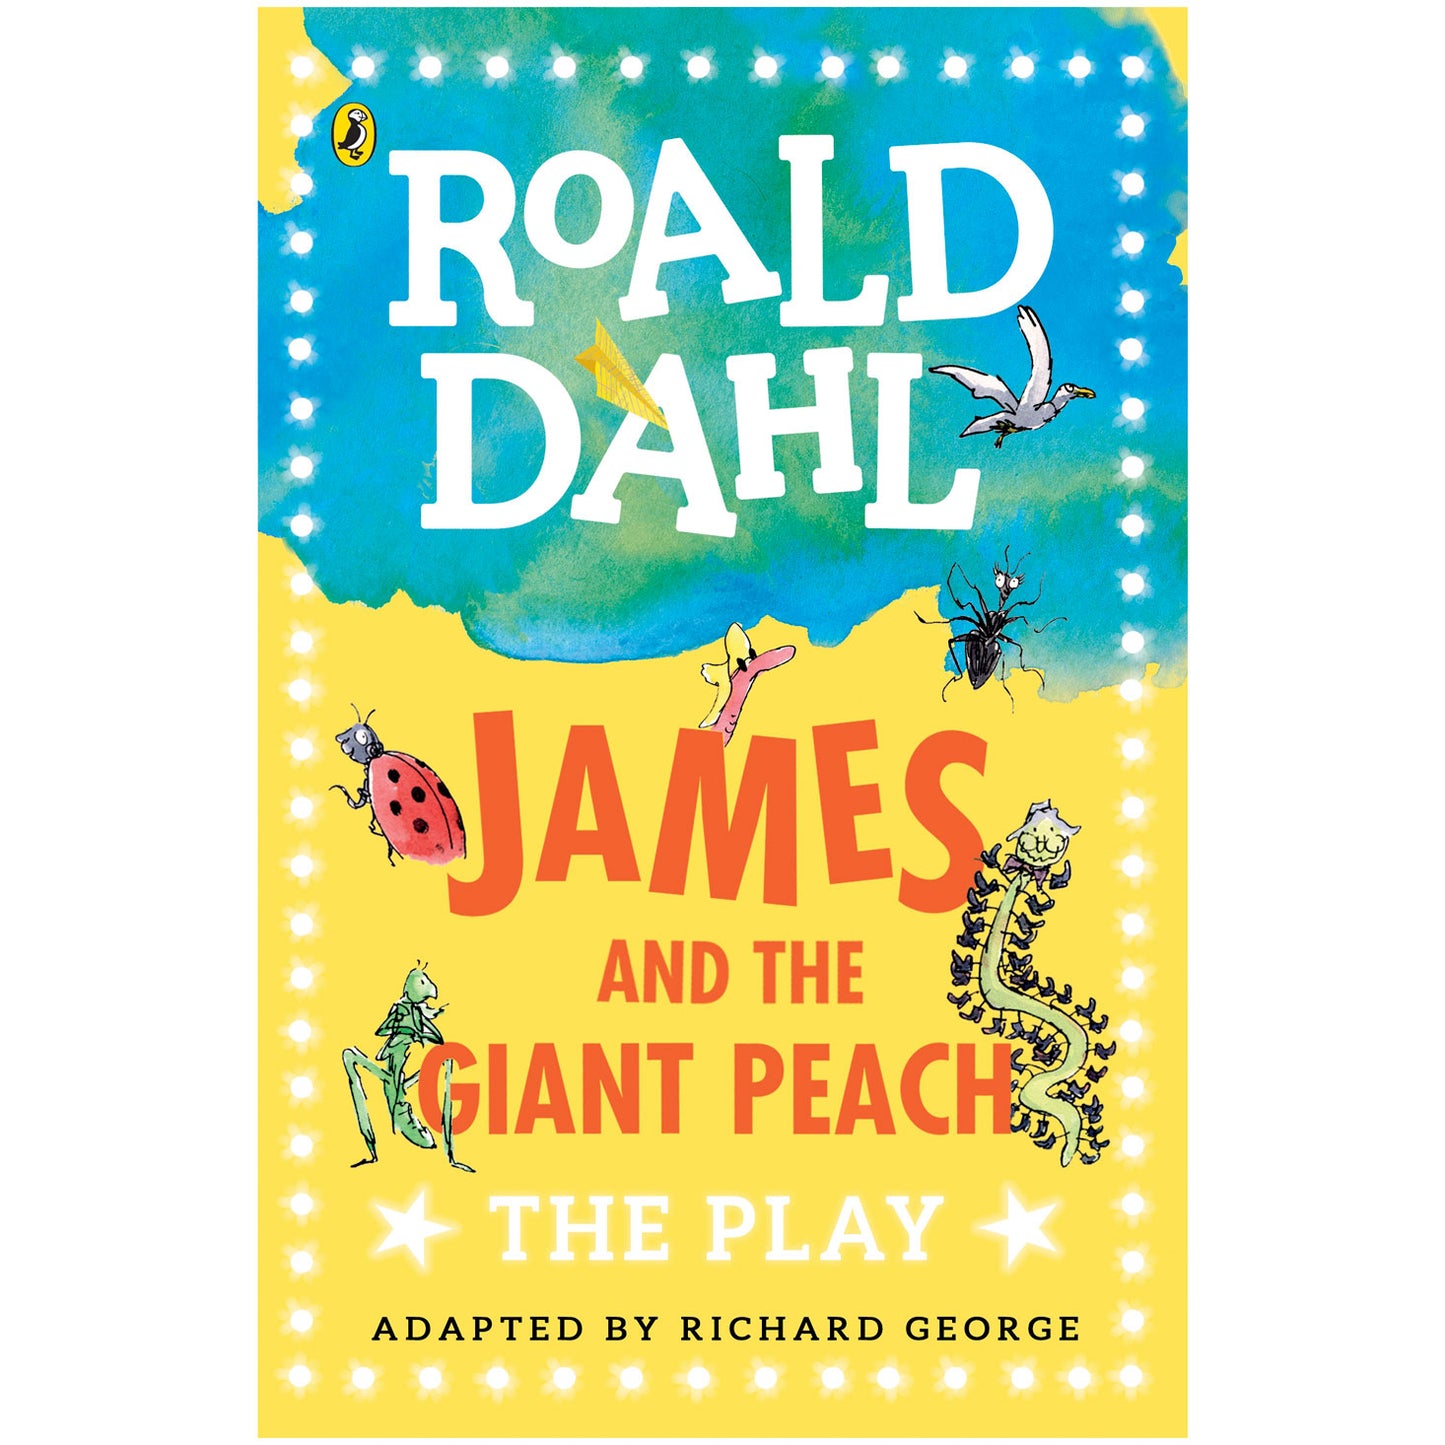 Plays based on James and the Giant Peach by Roald Dahl with illustrations by Quentin Blake